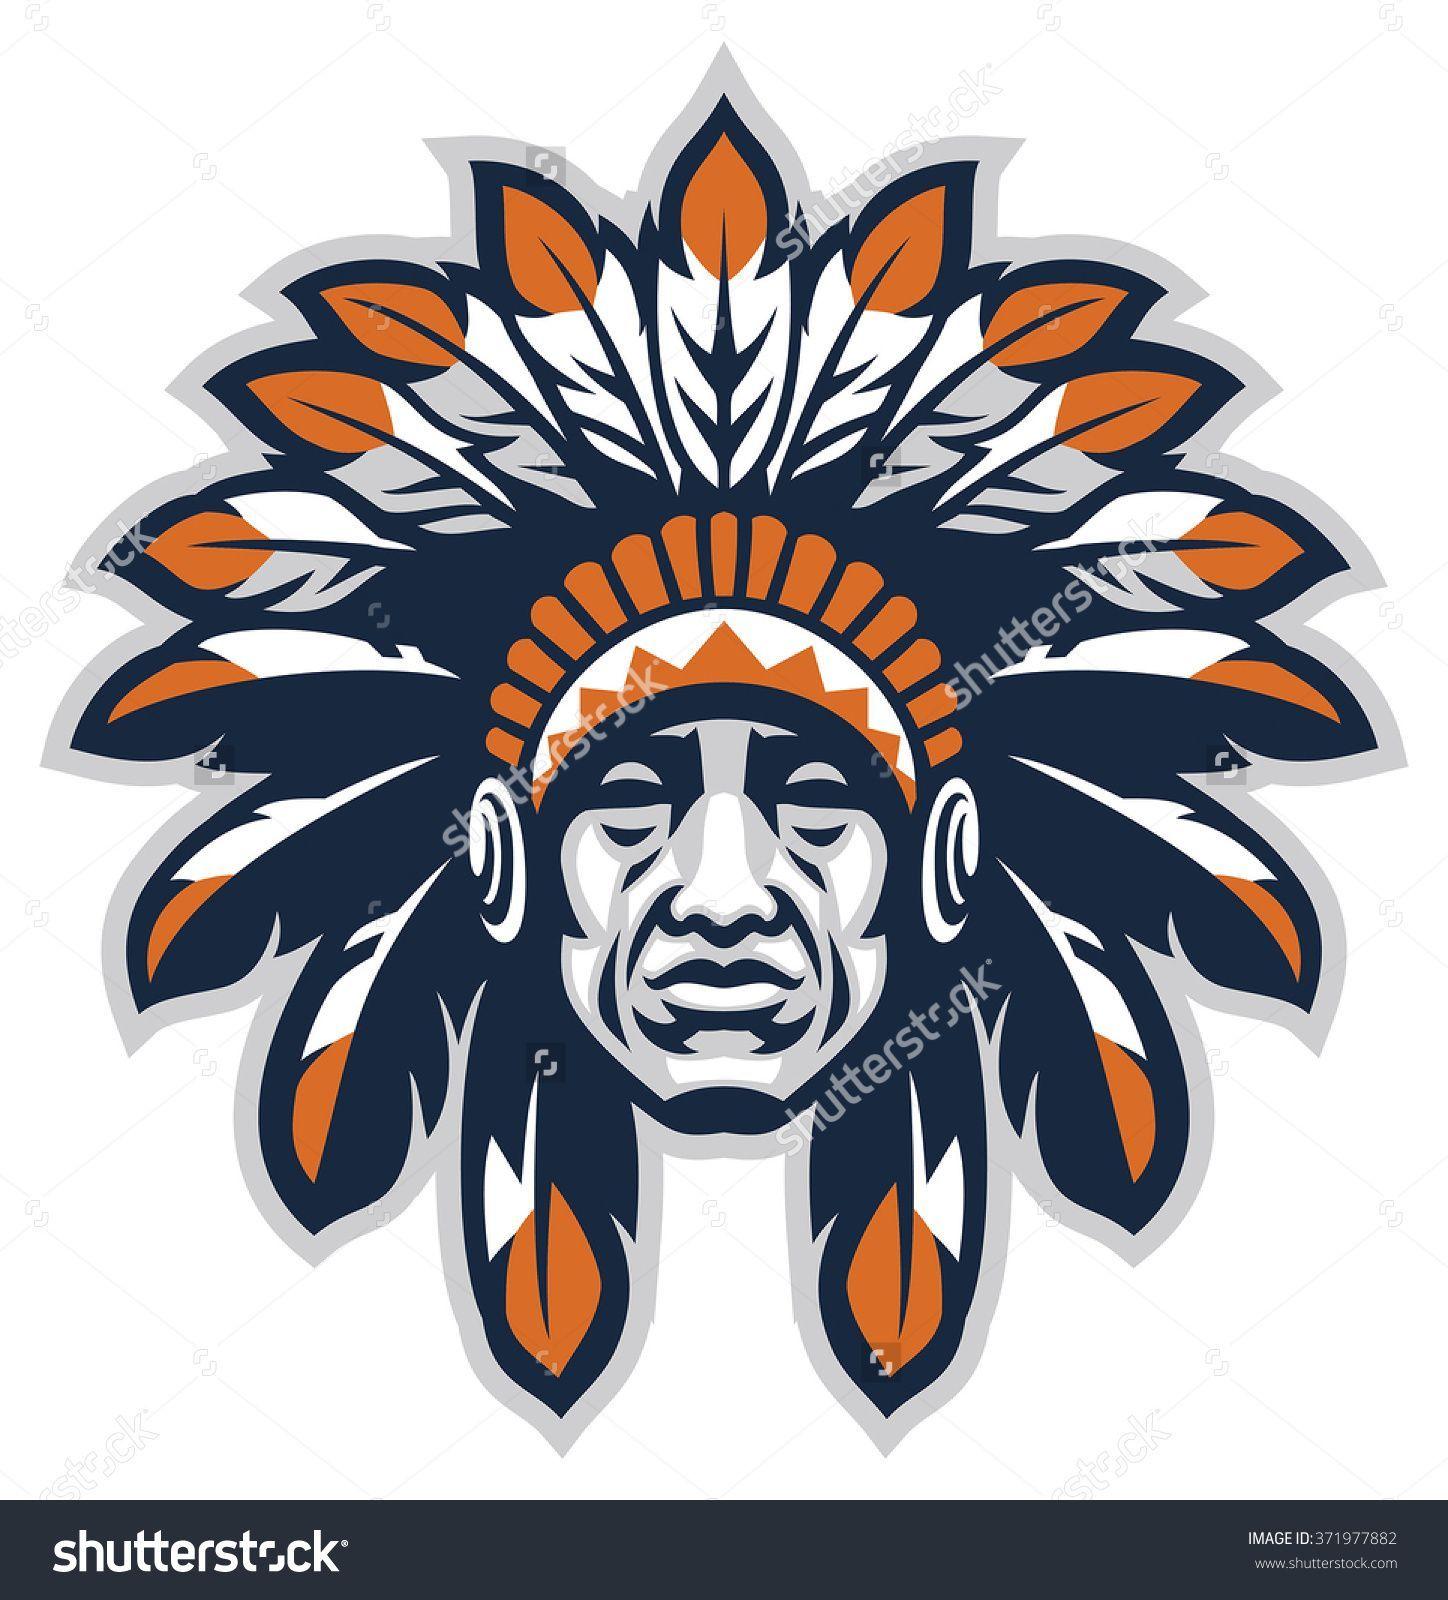 Indeian Cool Logo - Indian head mascot. Projects to try. Logo design, Mascot design, Logos